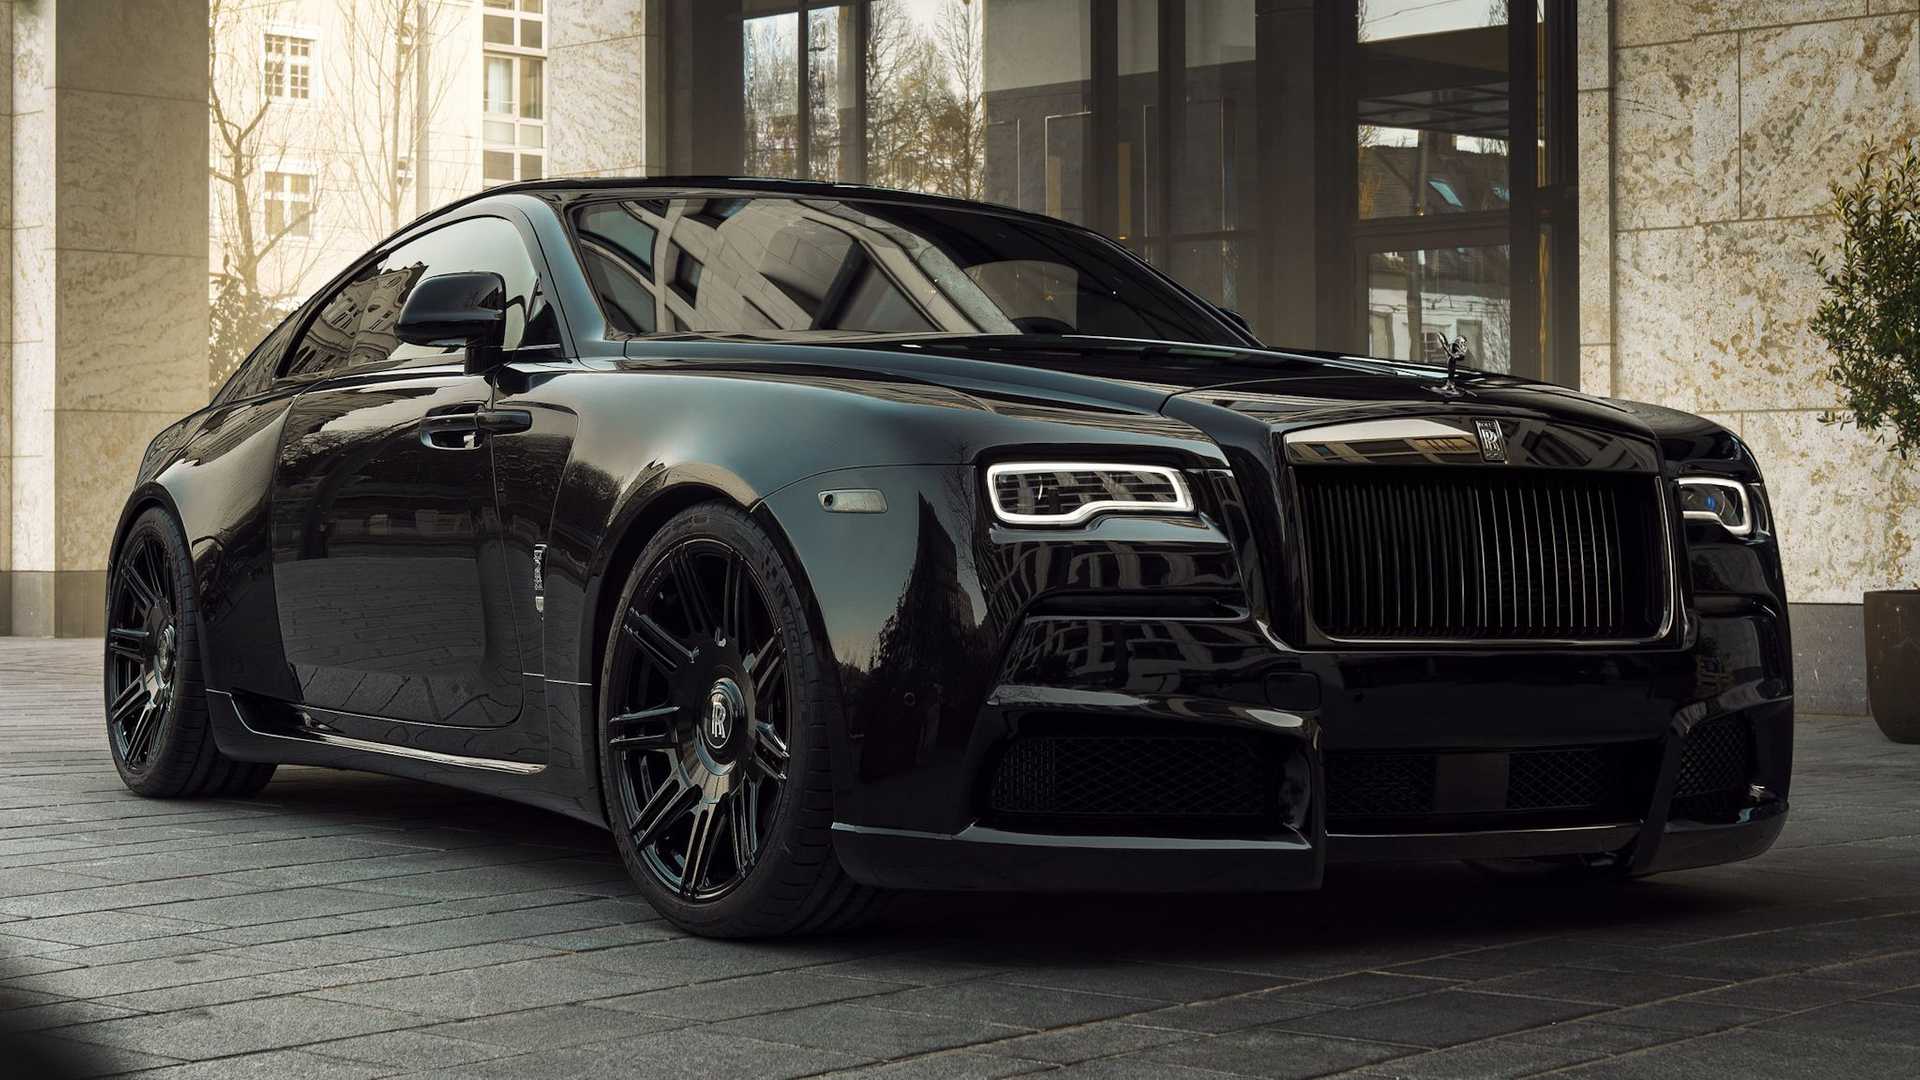 Rolls Royce Price in Pakistan 2023 Latest Models, Specs and